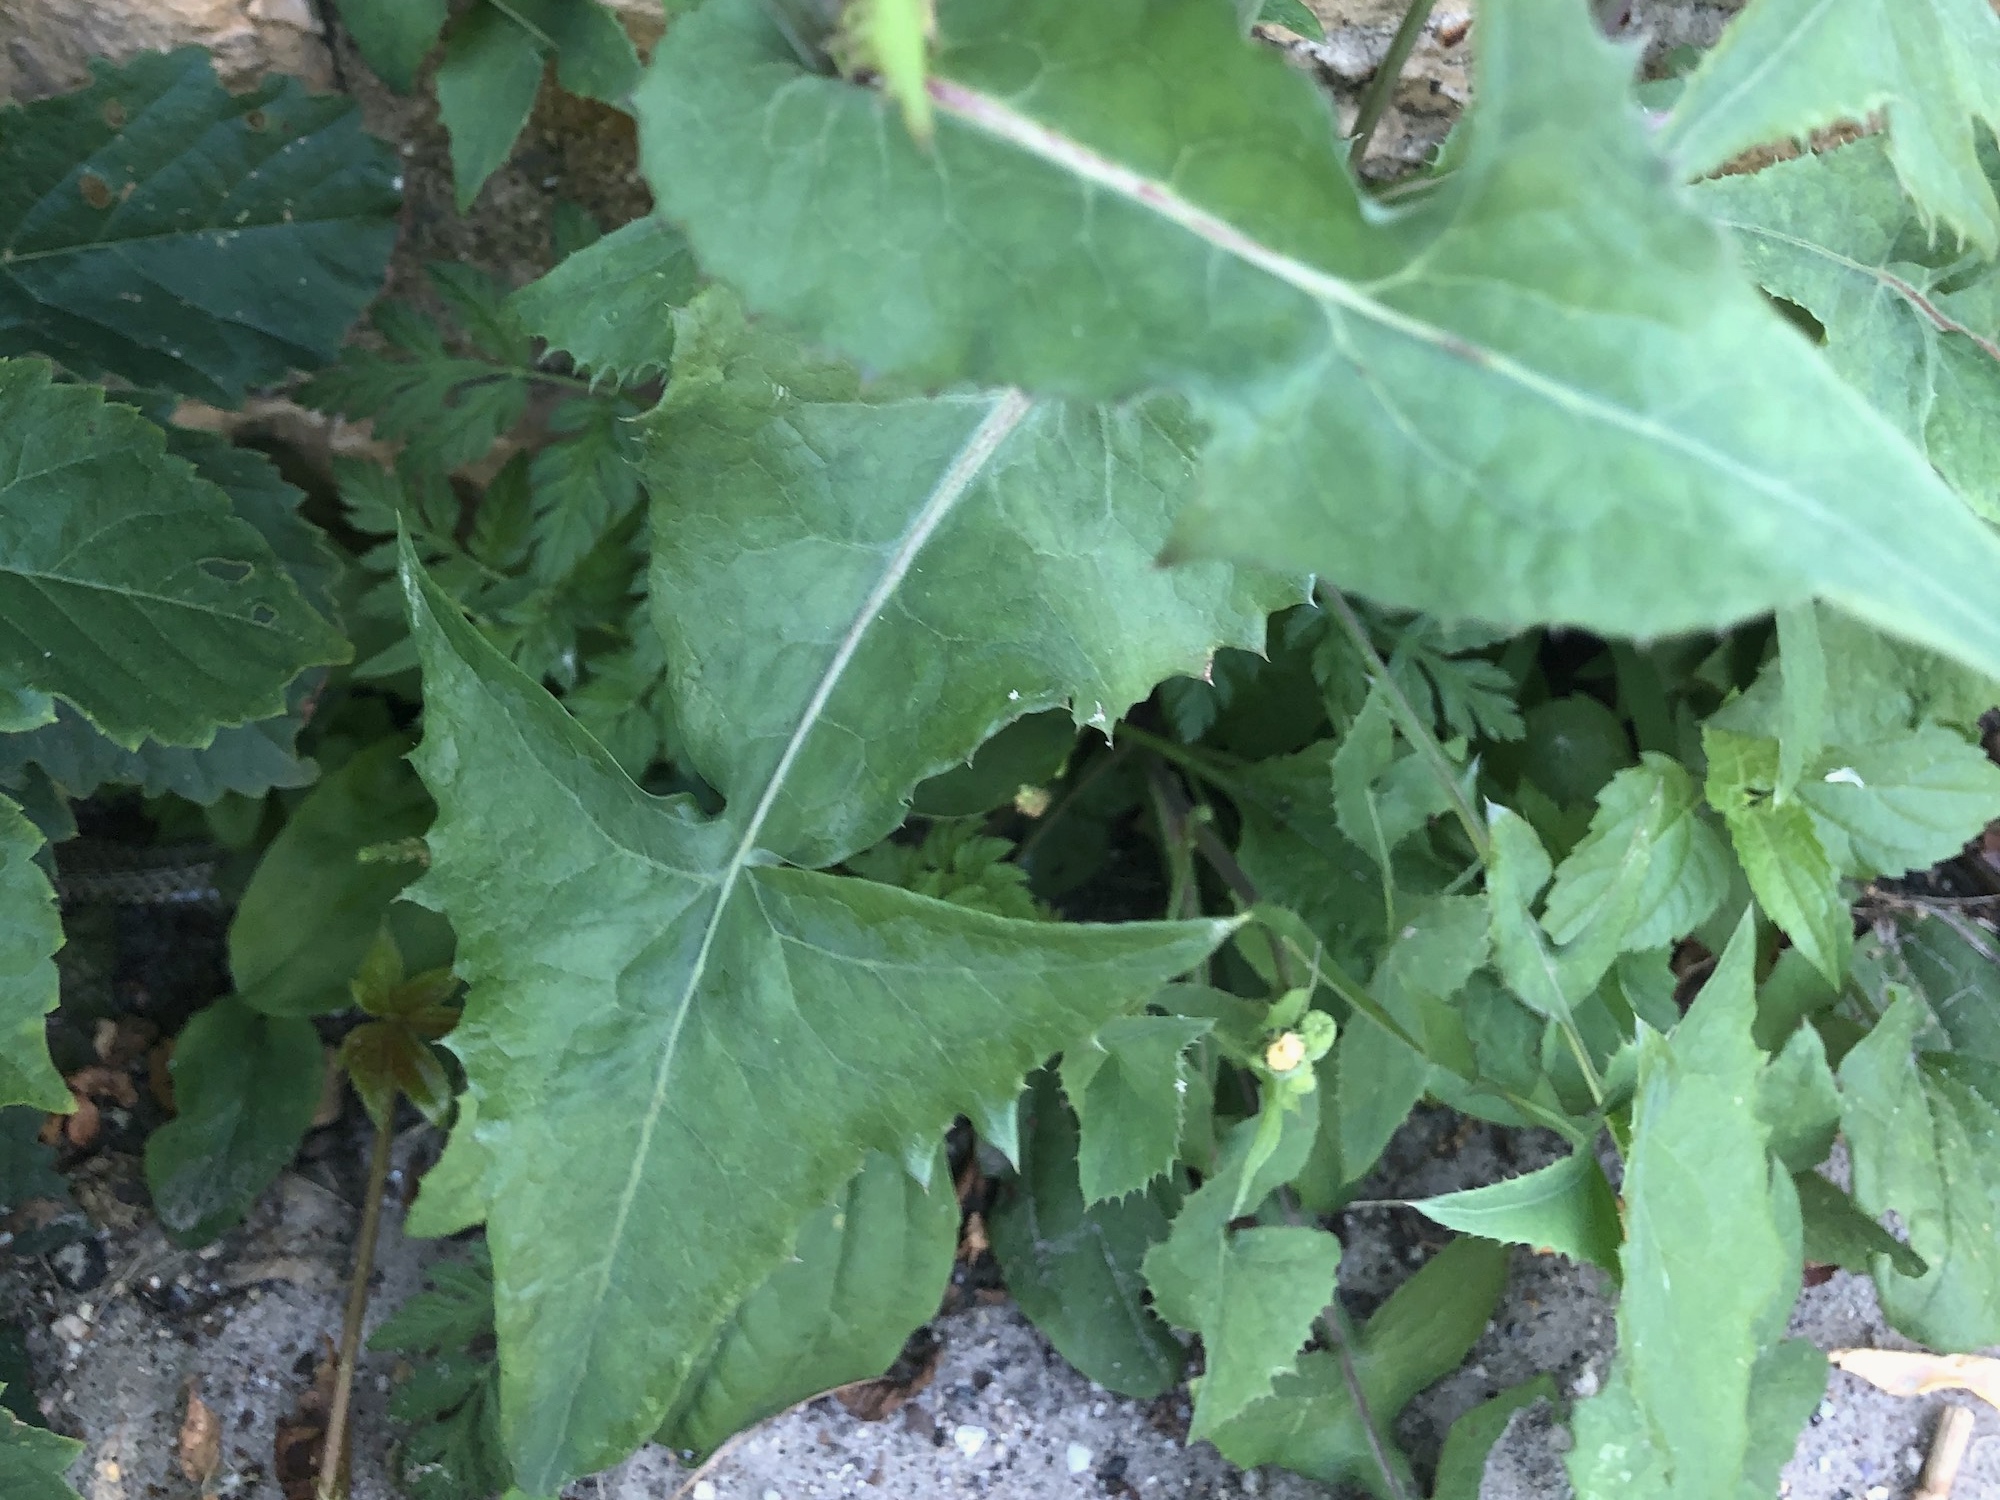 Common Sowthistle leaves next to Duck Pond wall on July 9, 2019.